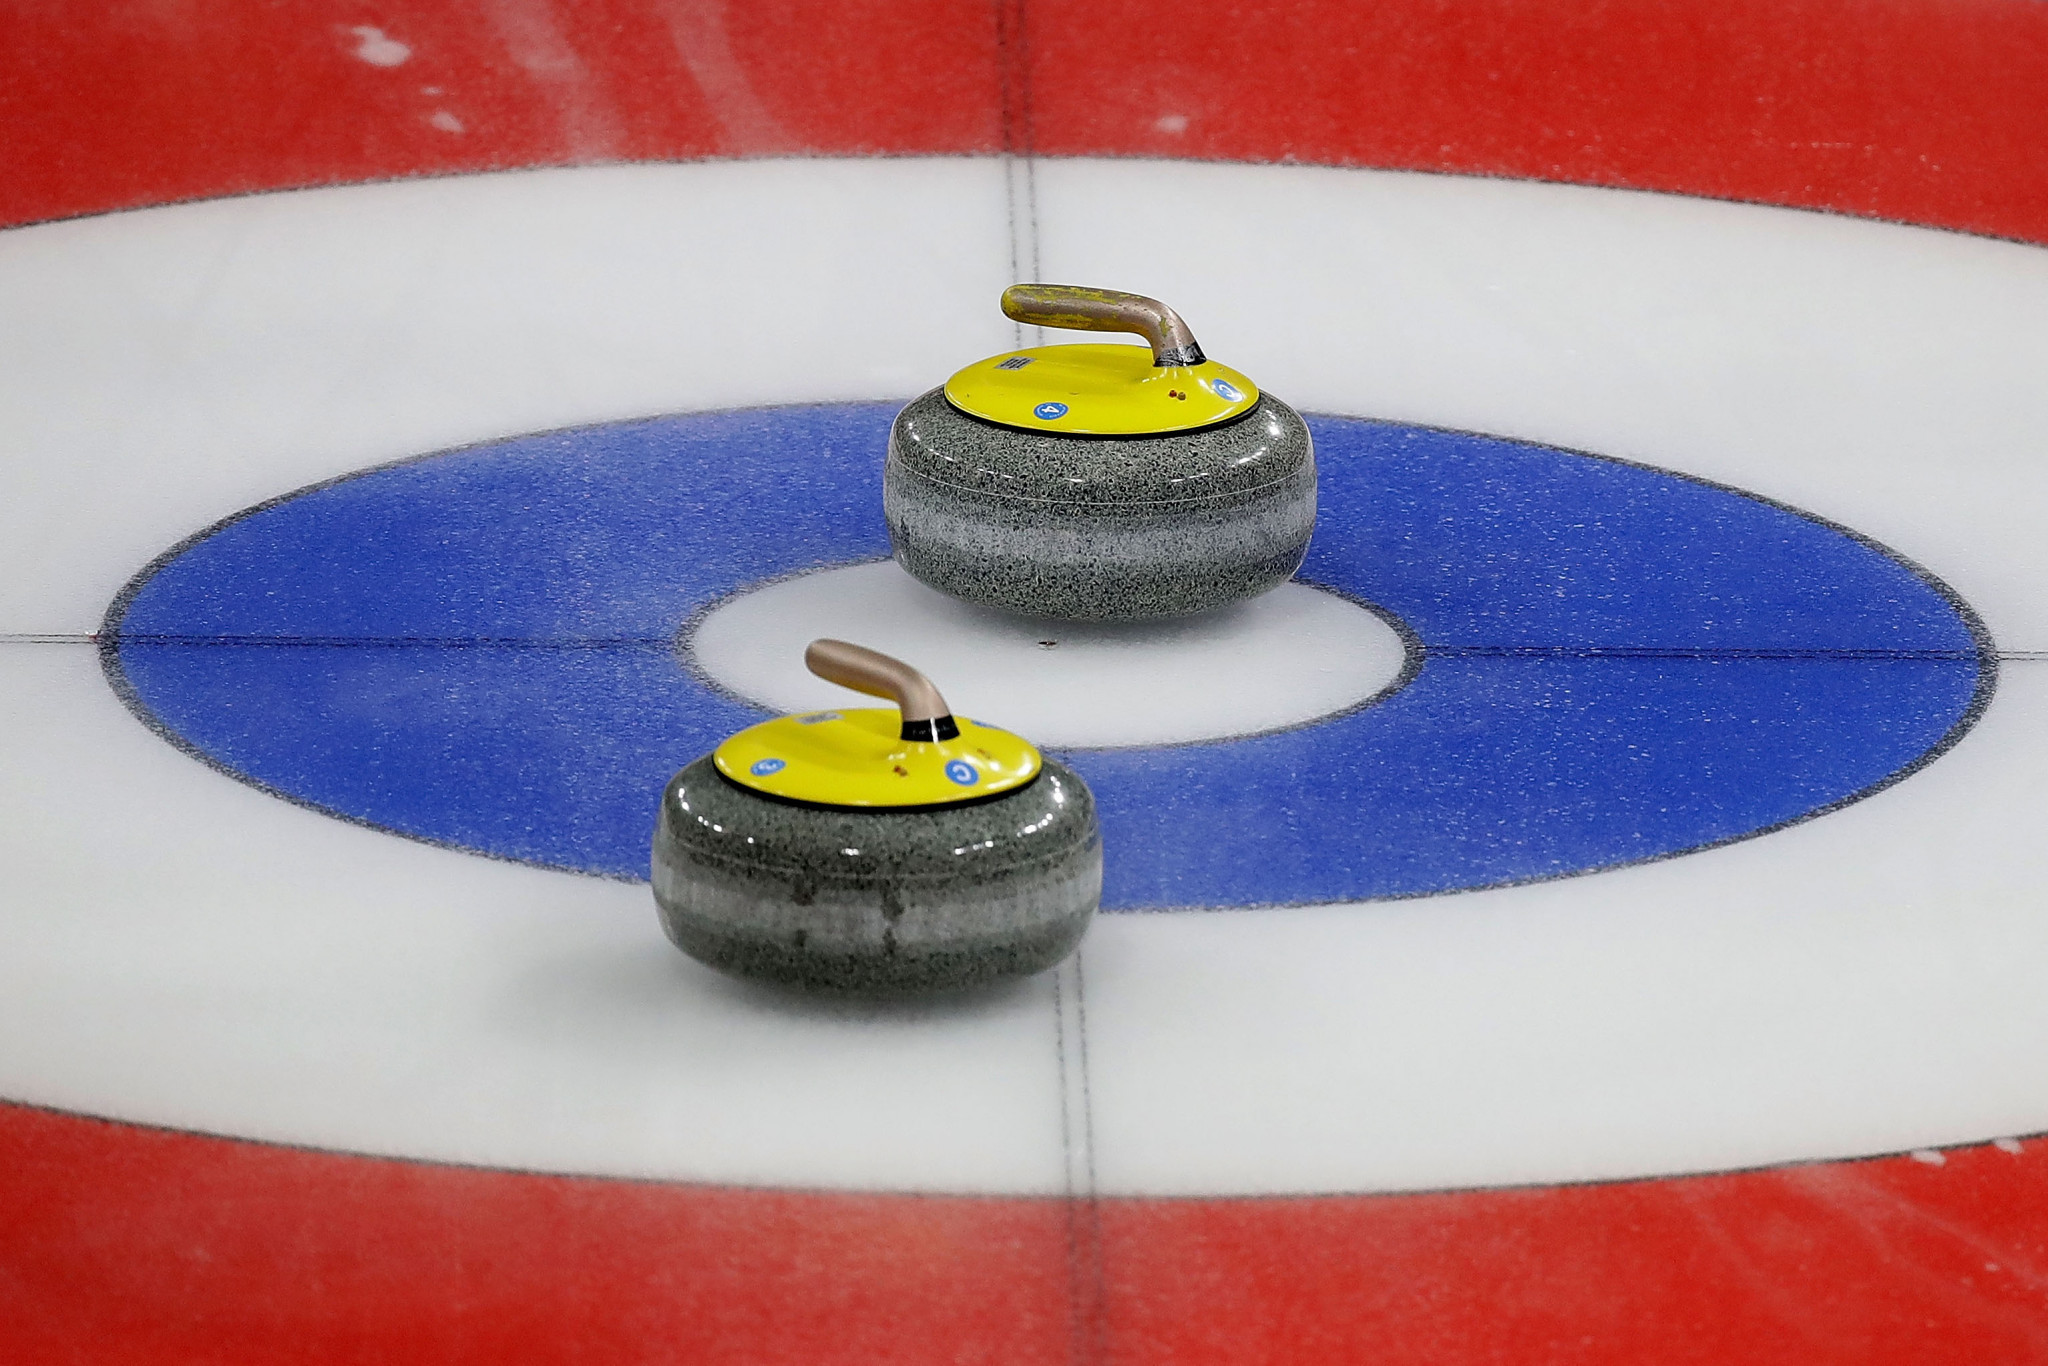 The Canadian Senior Curling Championships will take place in March ©World Curling